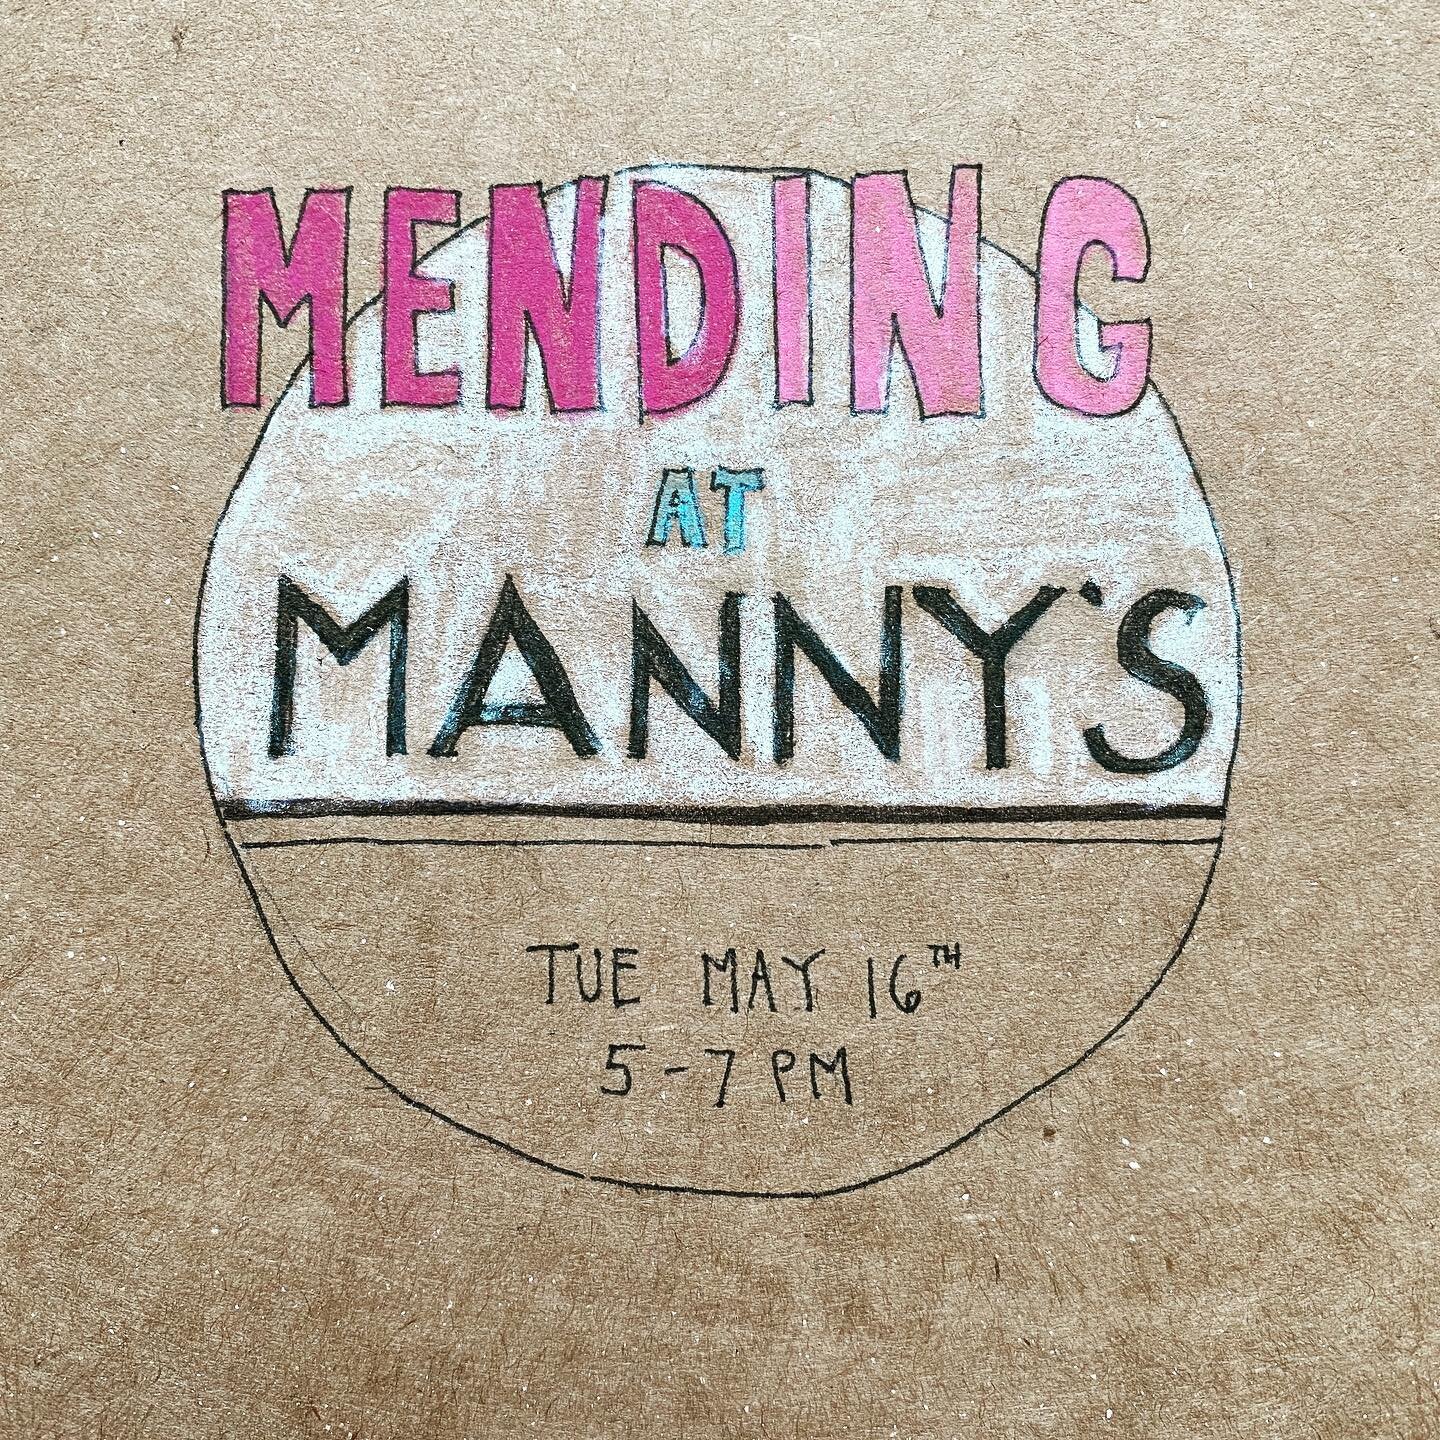 Excited to be hosting #themendinglibrary @welcometomannys in the mission on Tuesday 5.16 from 5-7pm. More info on the website. #mending #mendmay #visiblemending #repairandrewear #missionsf